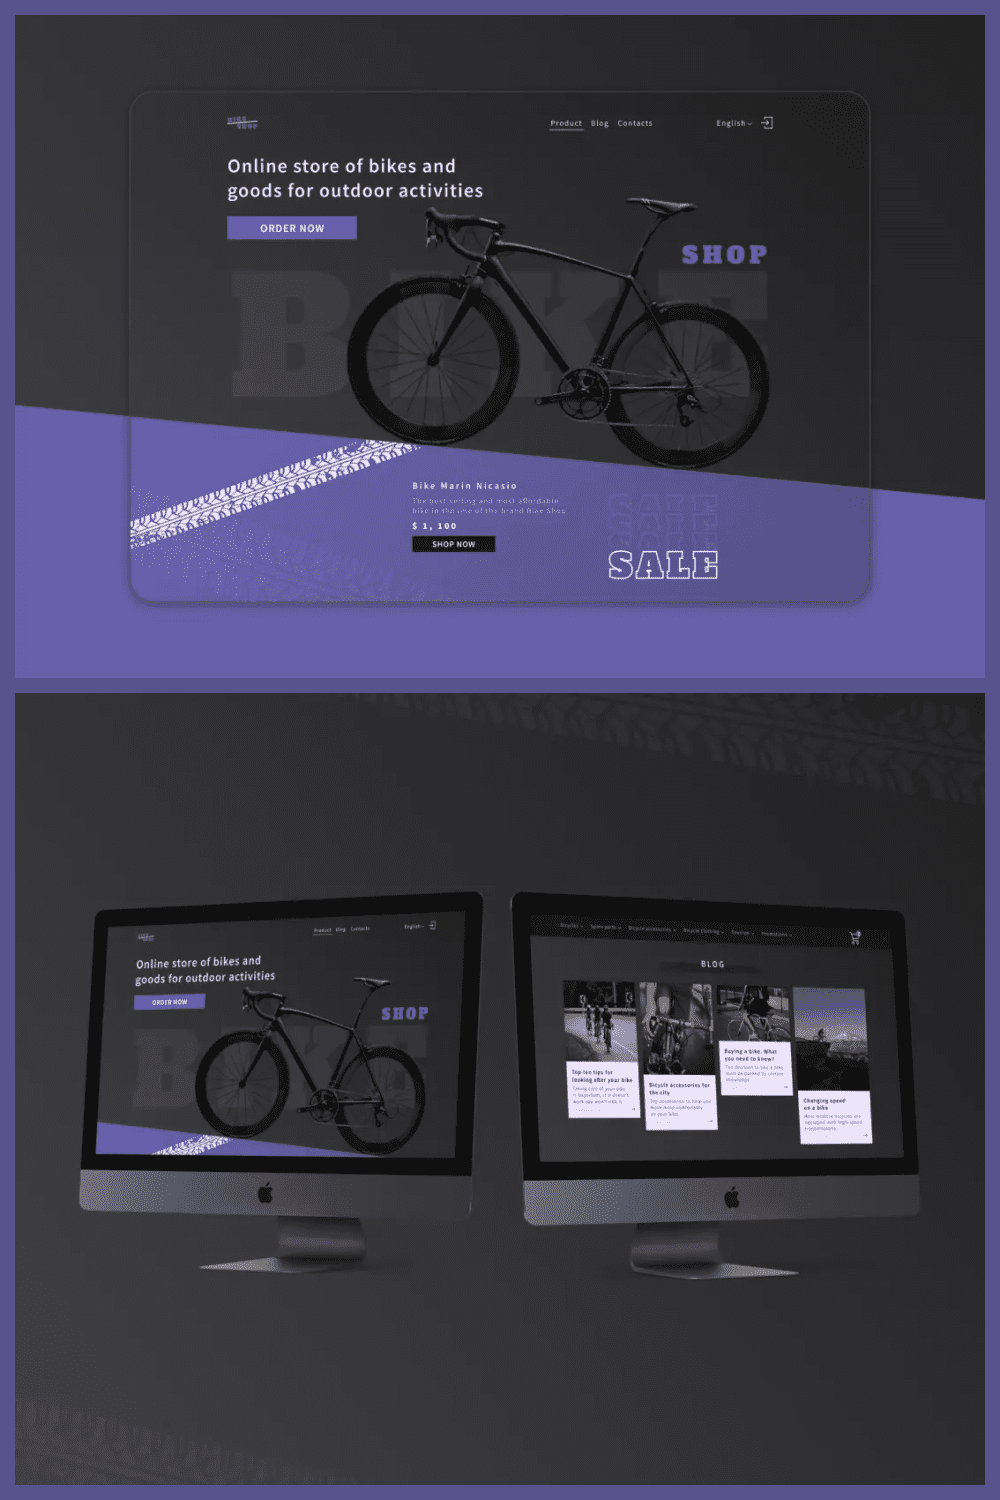 Screenshot of a website page with photos of a bicycle on a dark background.